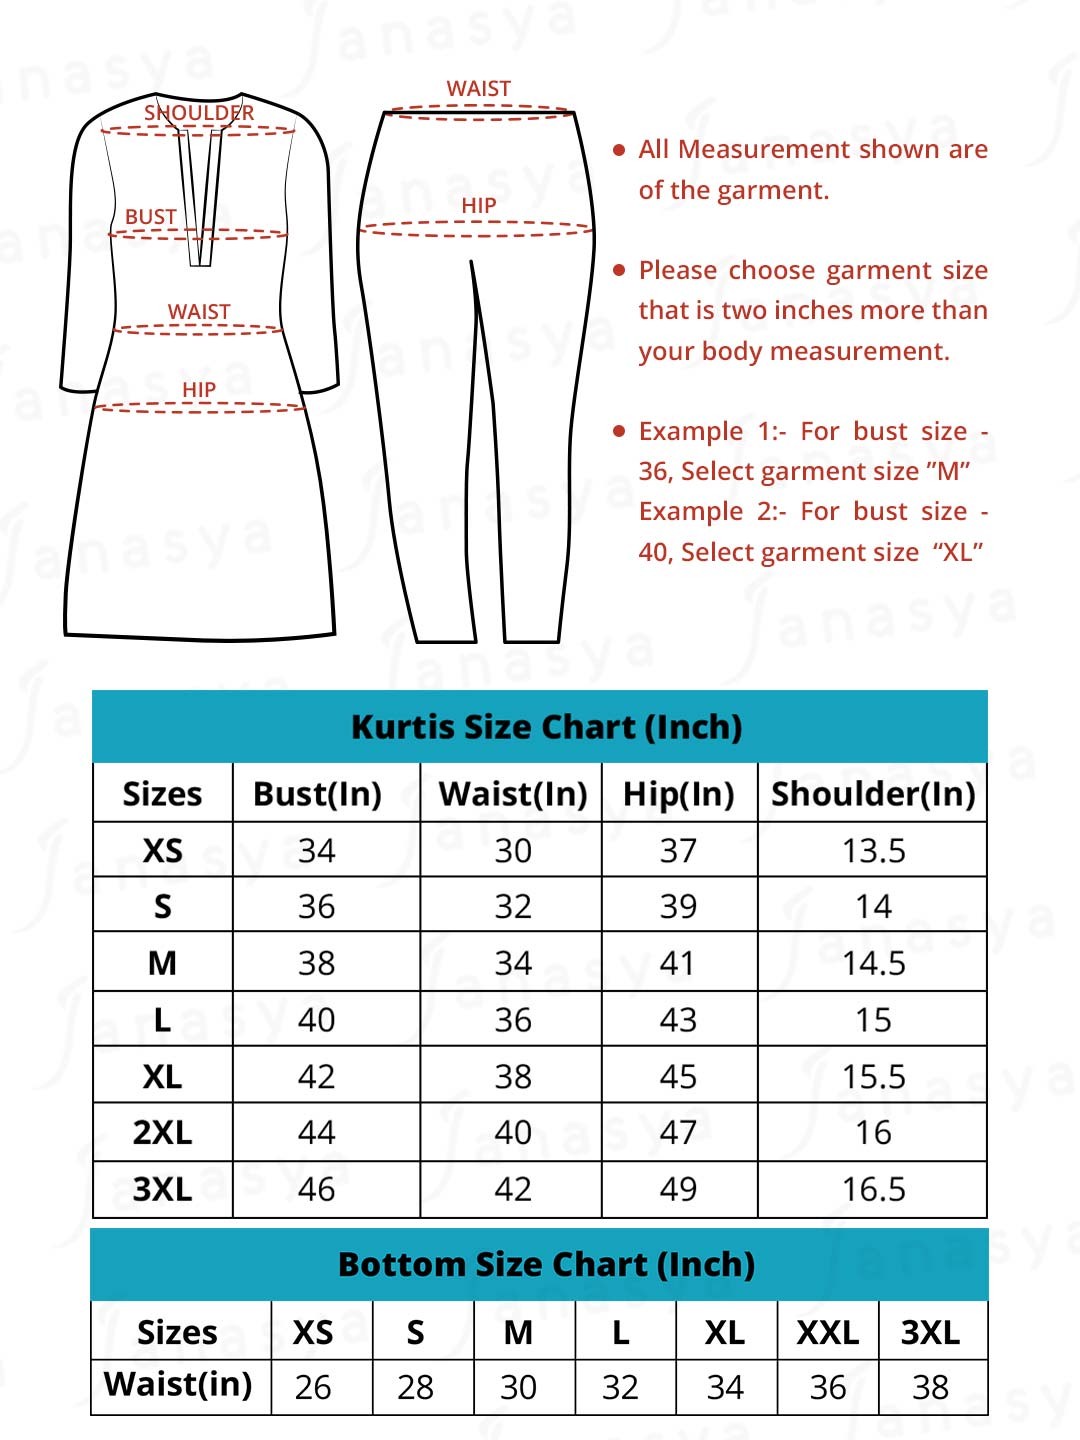 What type of kurti should a 5 foot girl wear? - Quora